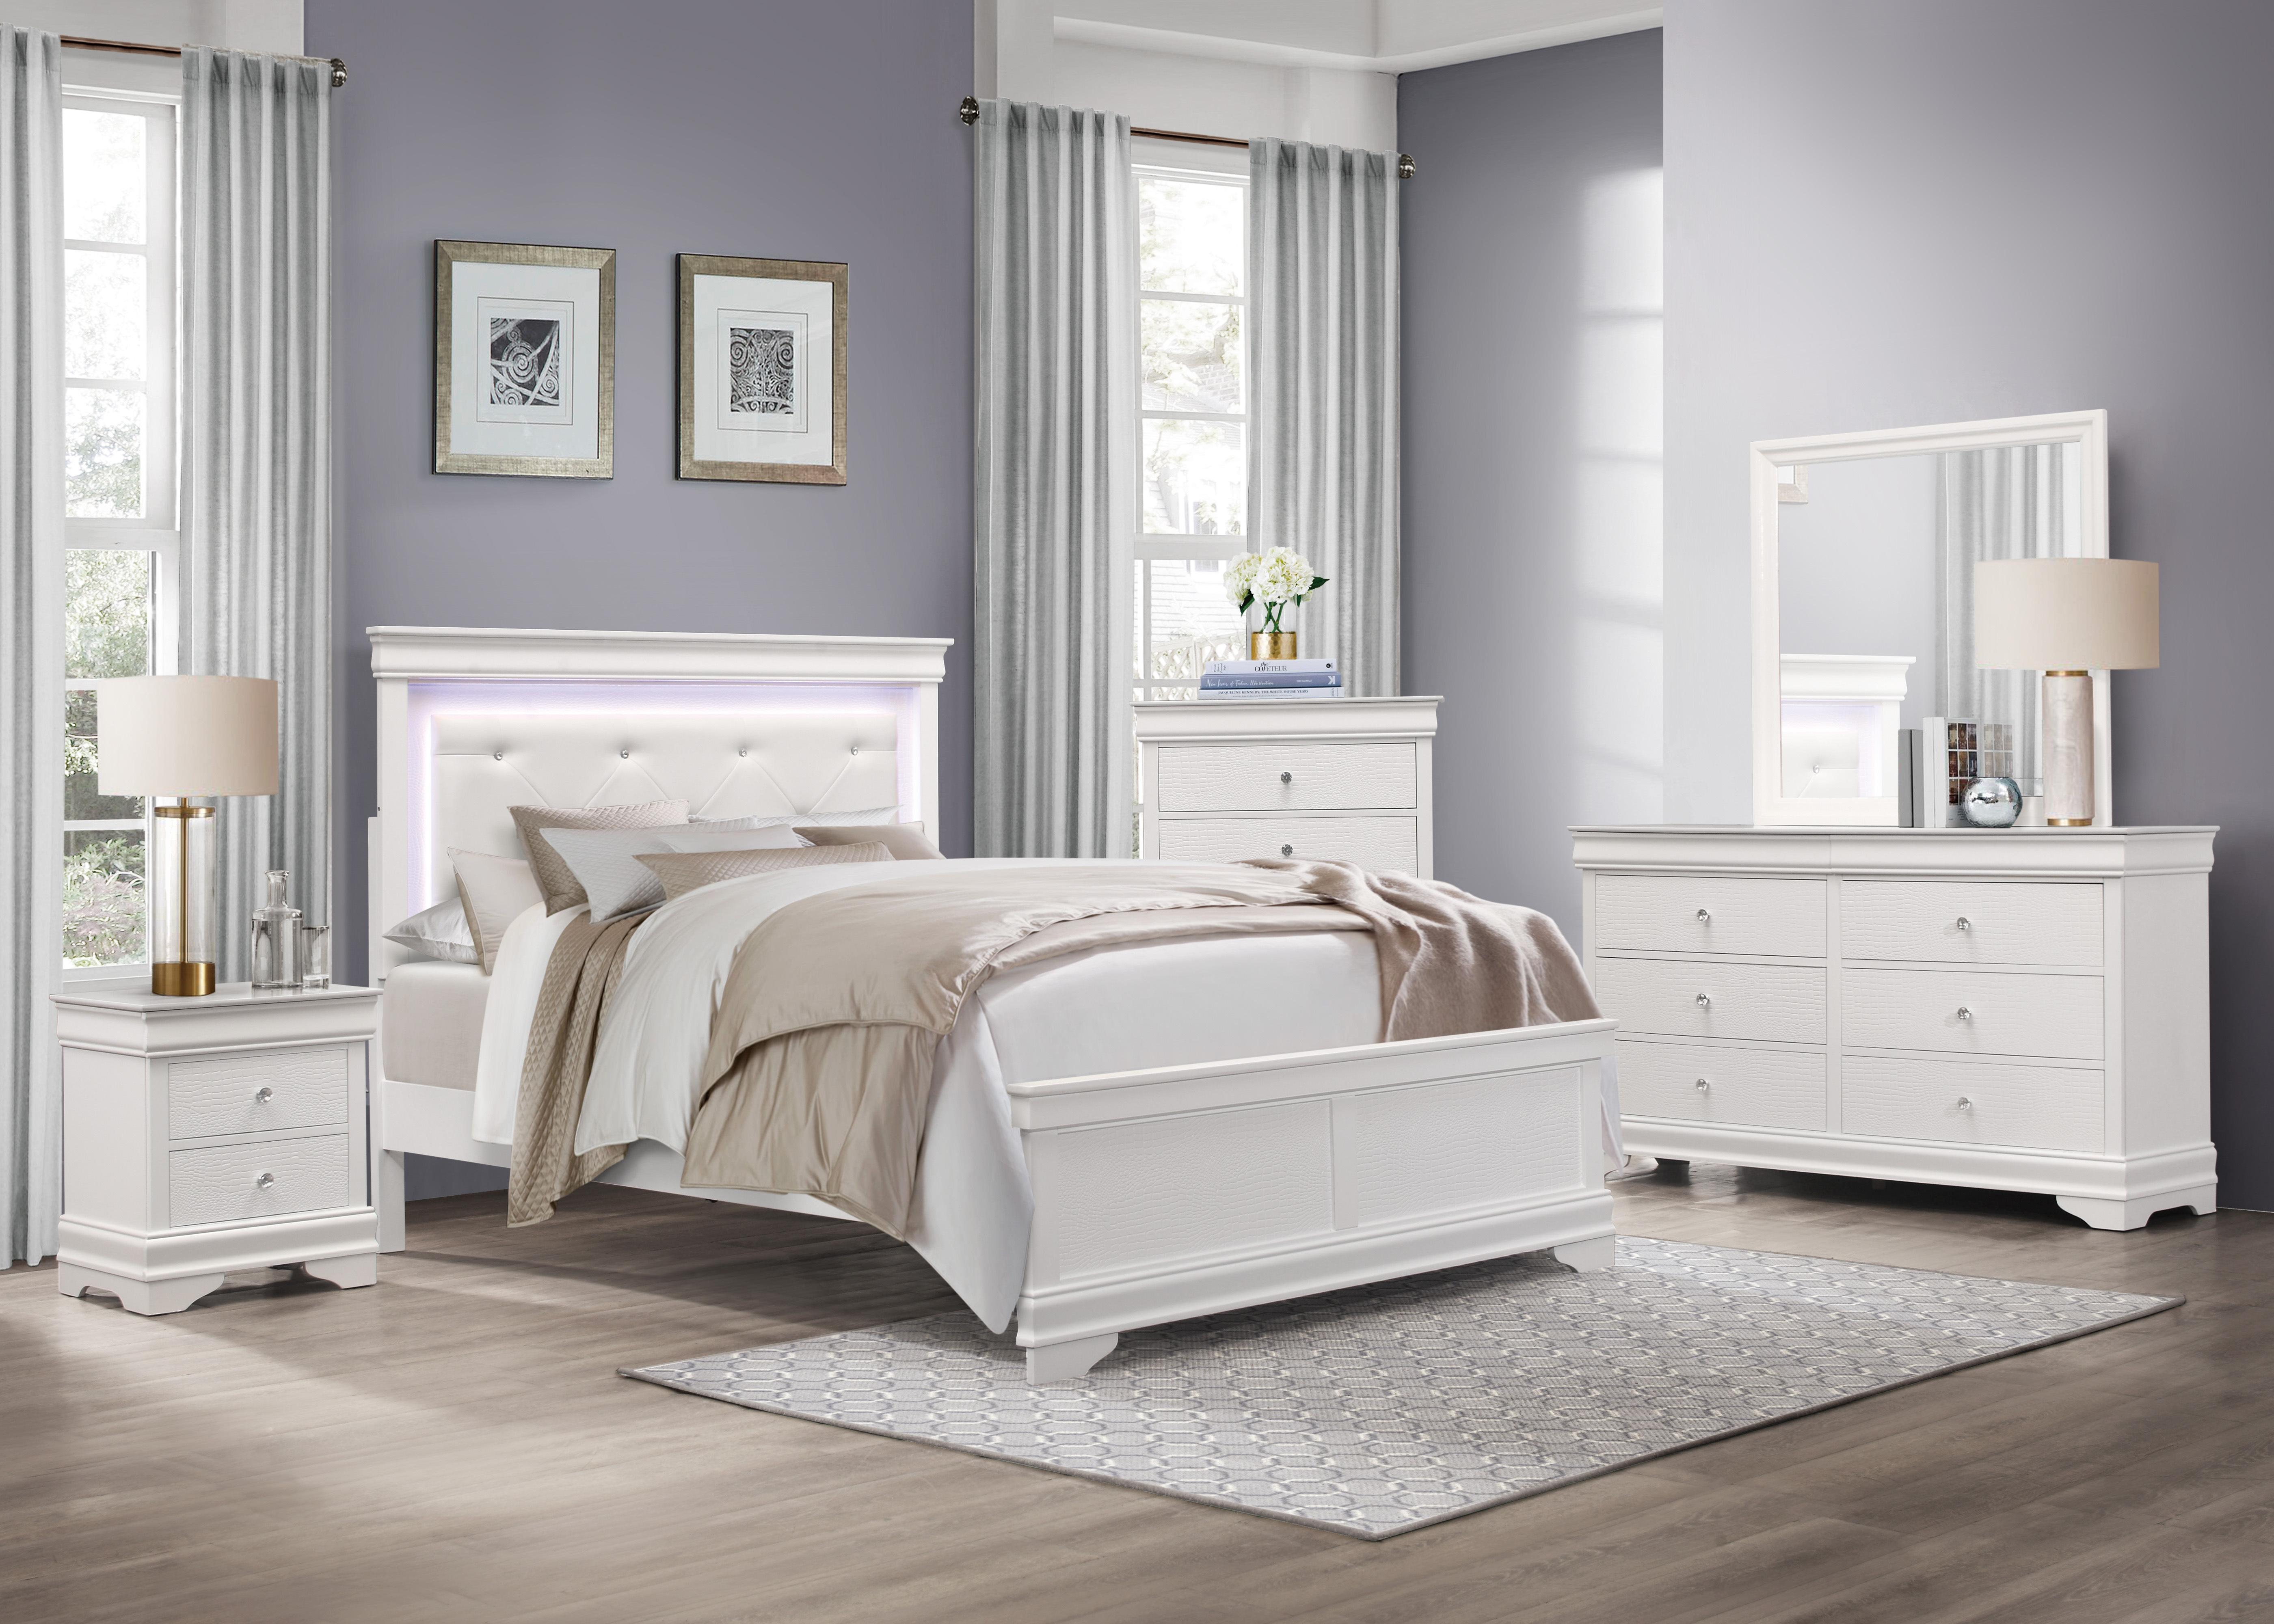 Traditional Bedroom Set 1556WT-1-5PC Lana 1556WT-1-5PC in White Faux Leather